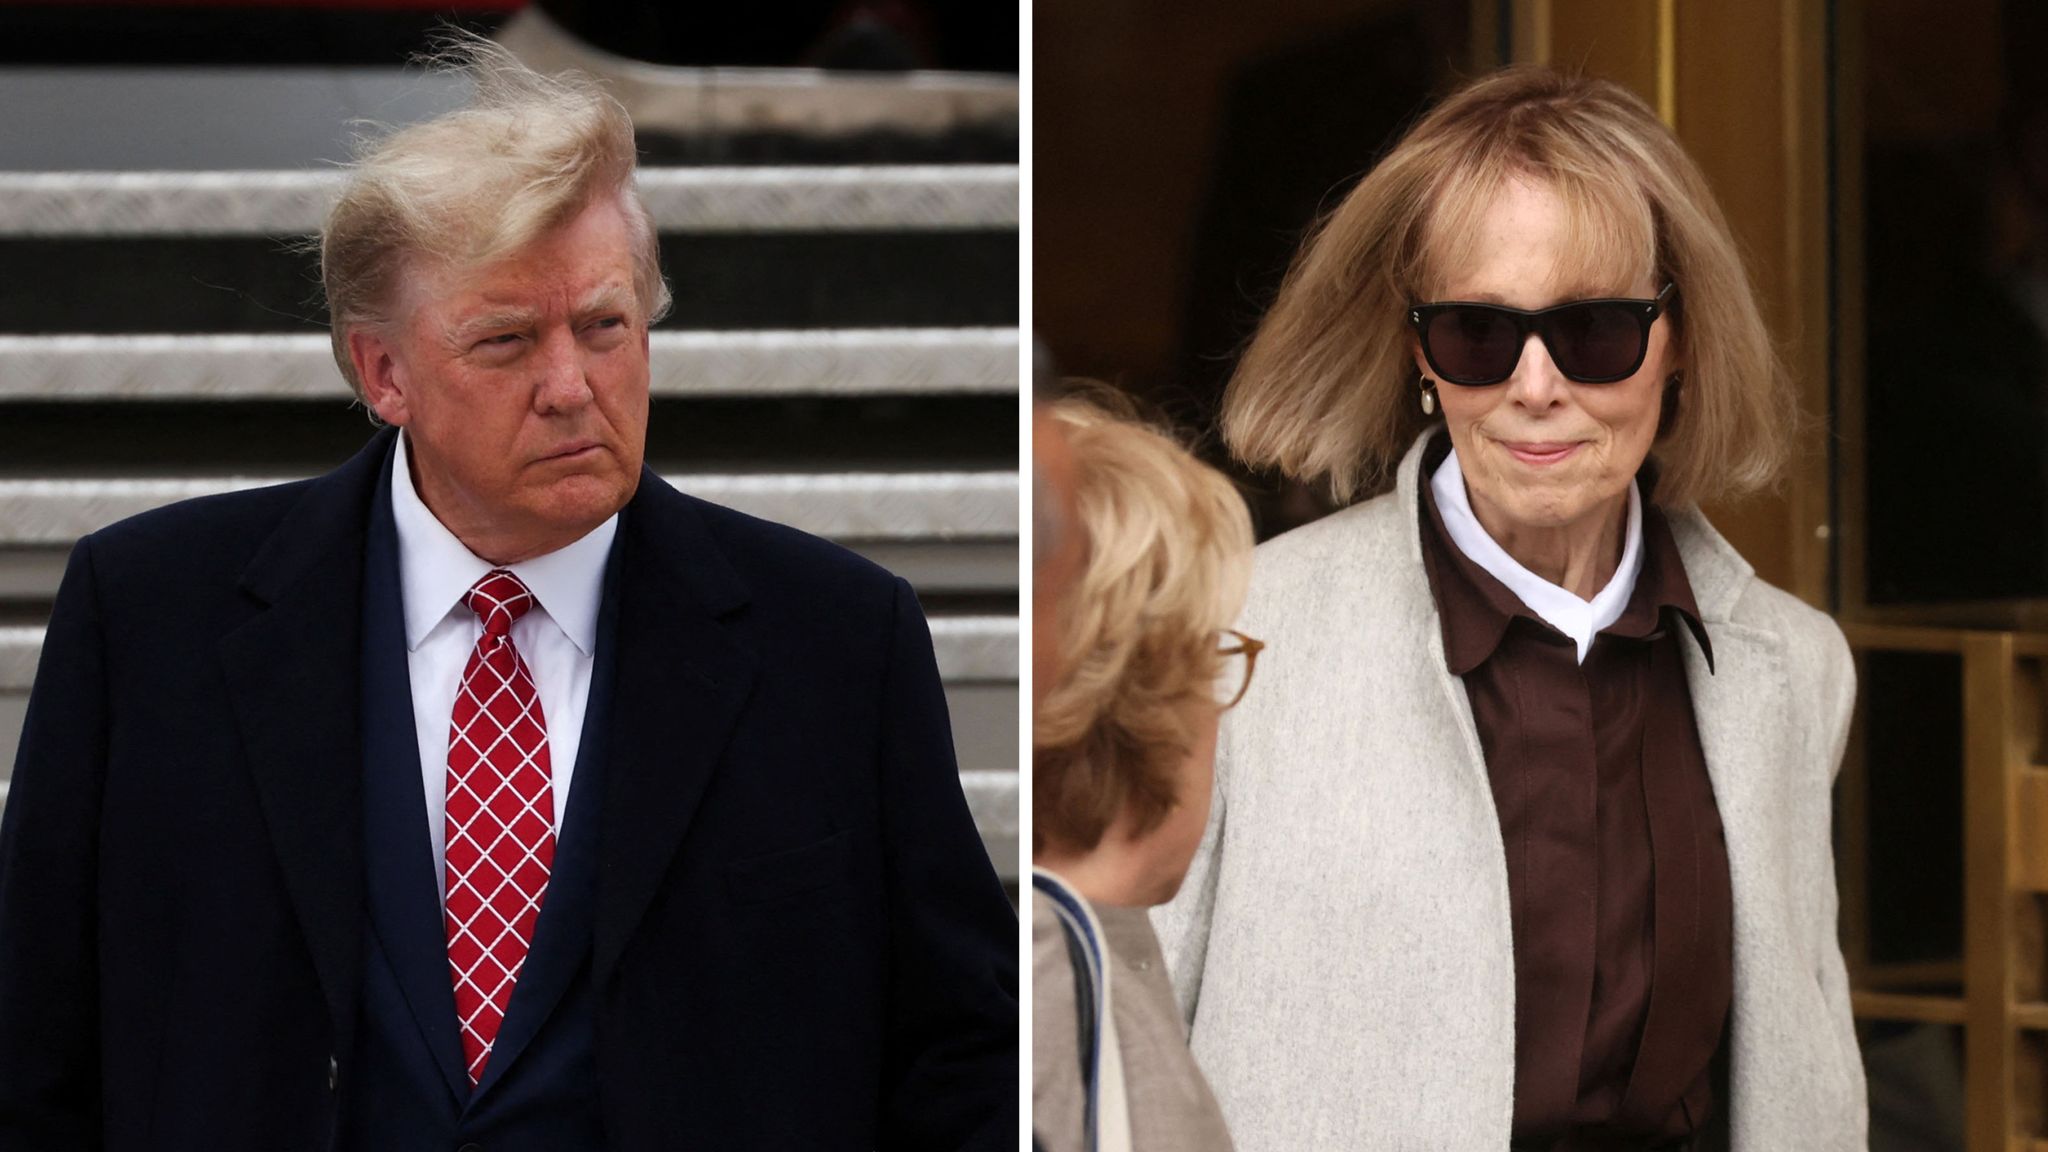 New York jury found Donald Trump liable for sexually abusing writer E Jean Carroll